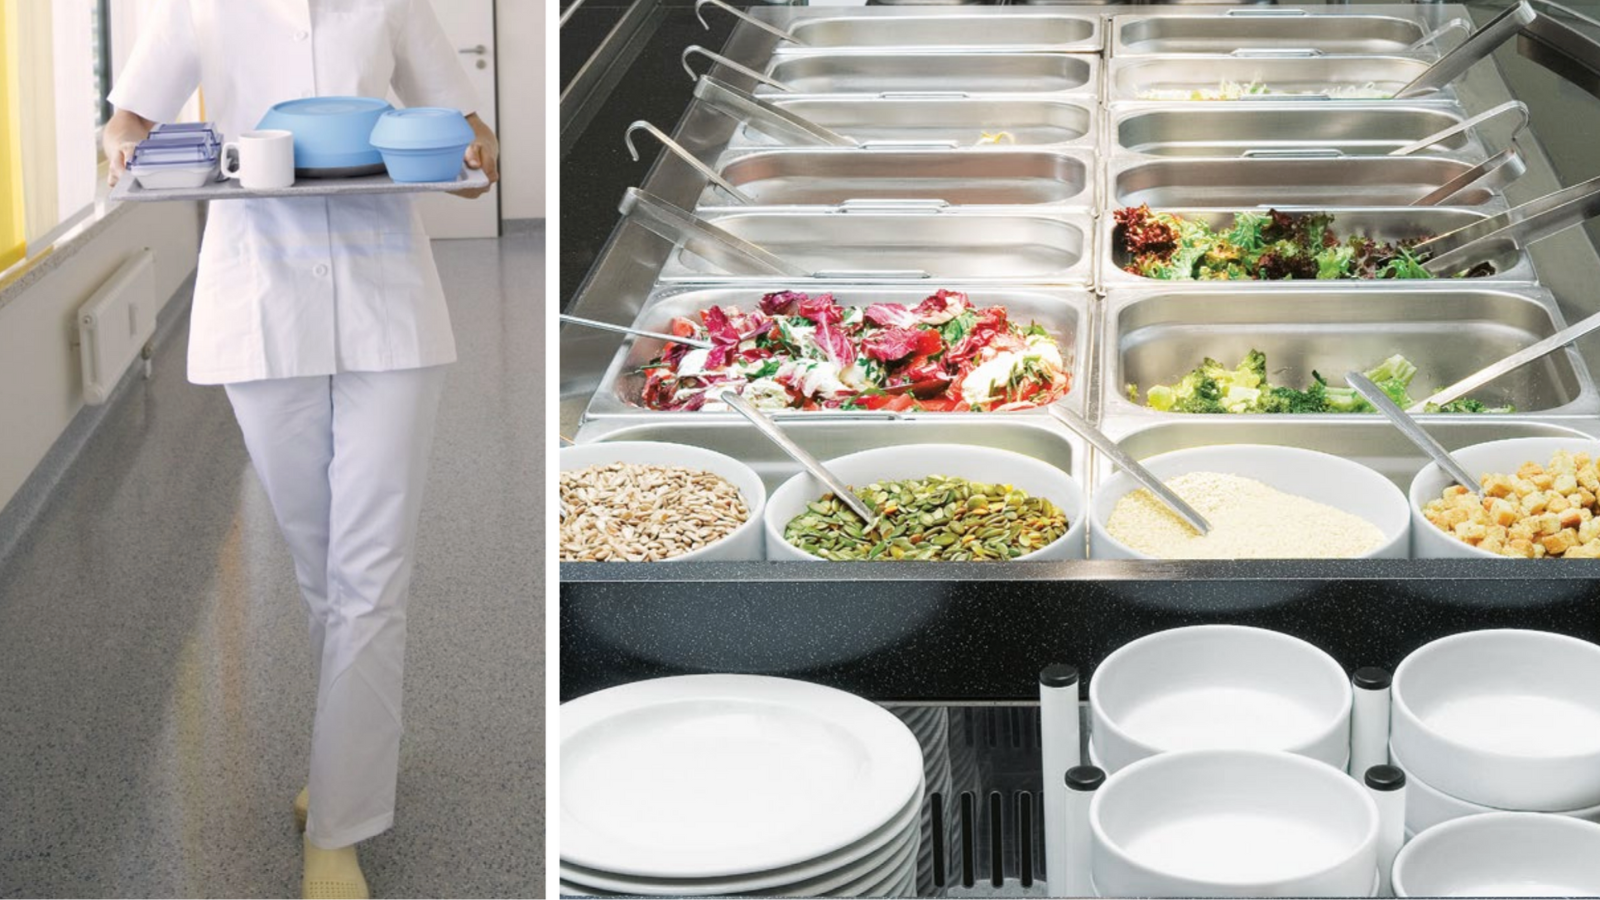 Current Healthcare Foodservice Trends and How They Relate to Tabletop